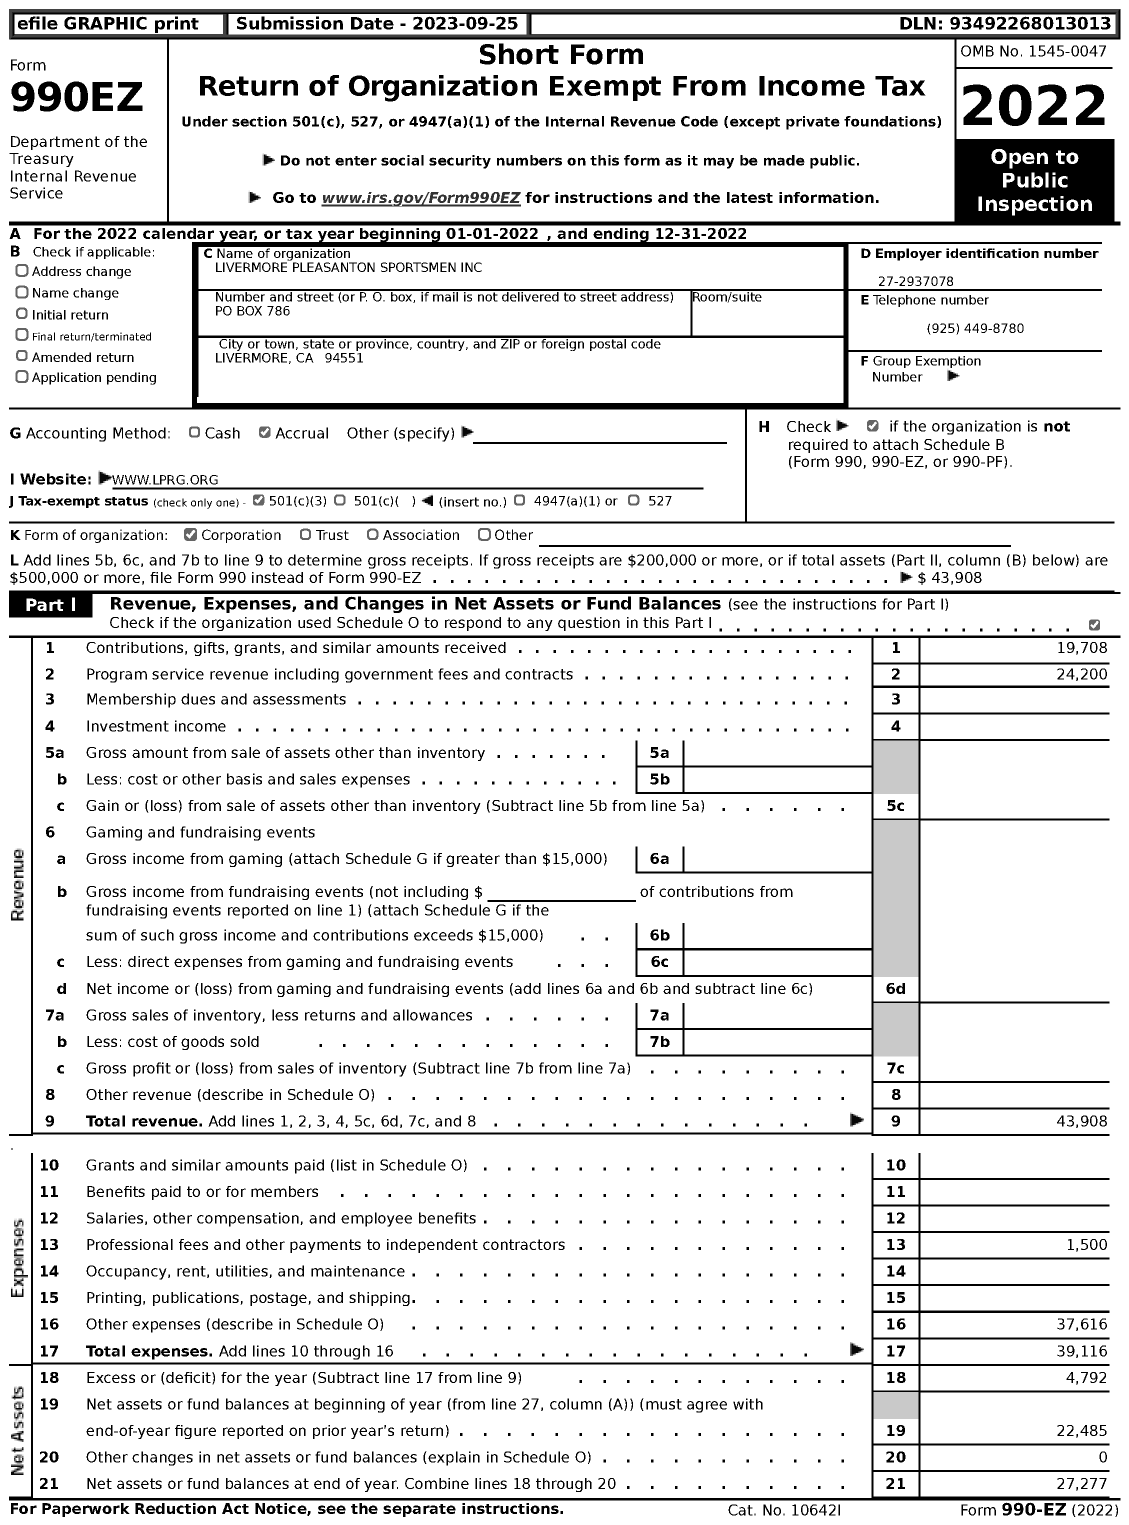 Image of first page of 2022 Form 990EZ for Livermore Pleasanton Sportsmen